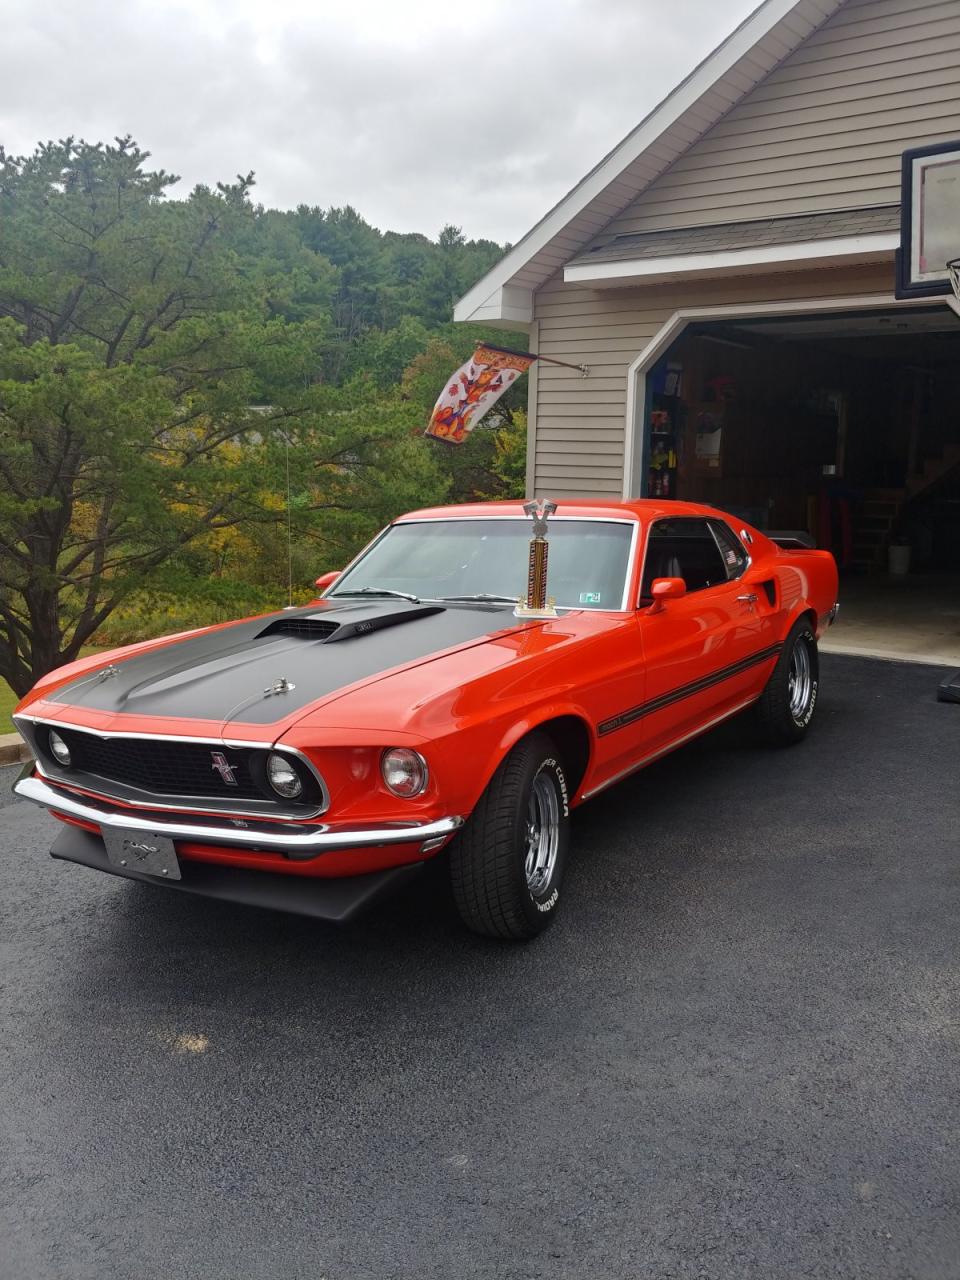 The 1969 Ford Mustang Mach 1 with 480 HP: A Muscle Car Legend